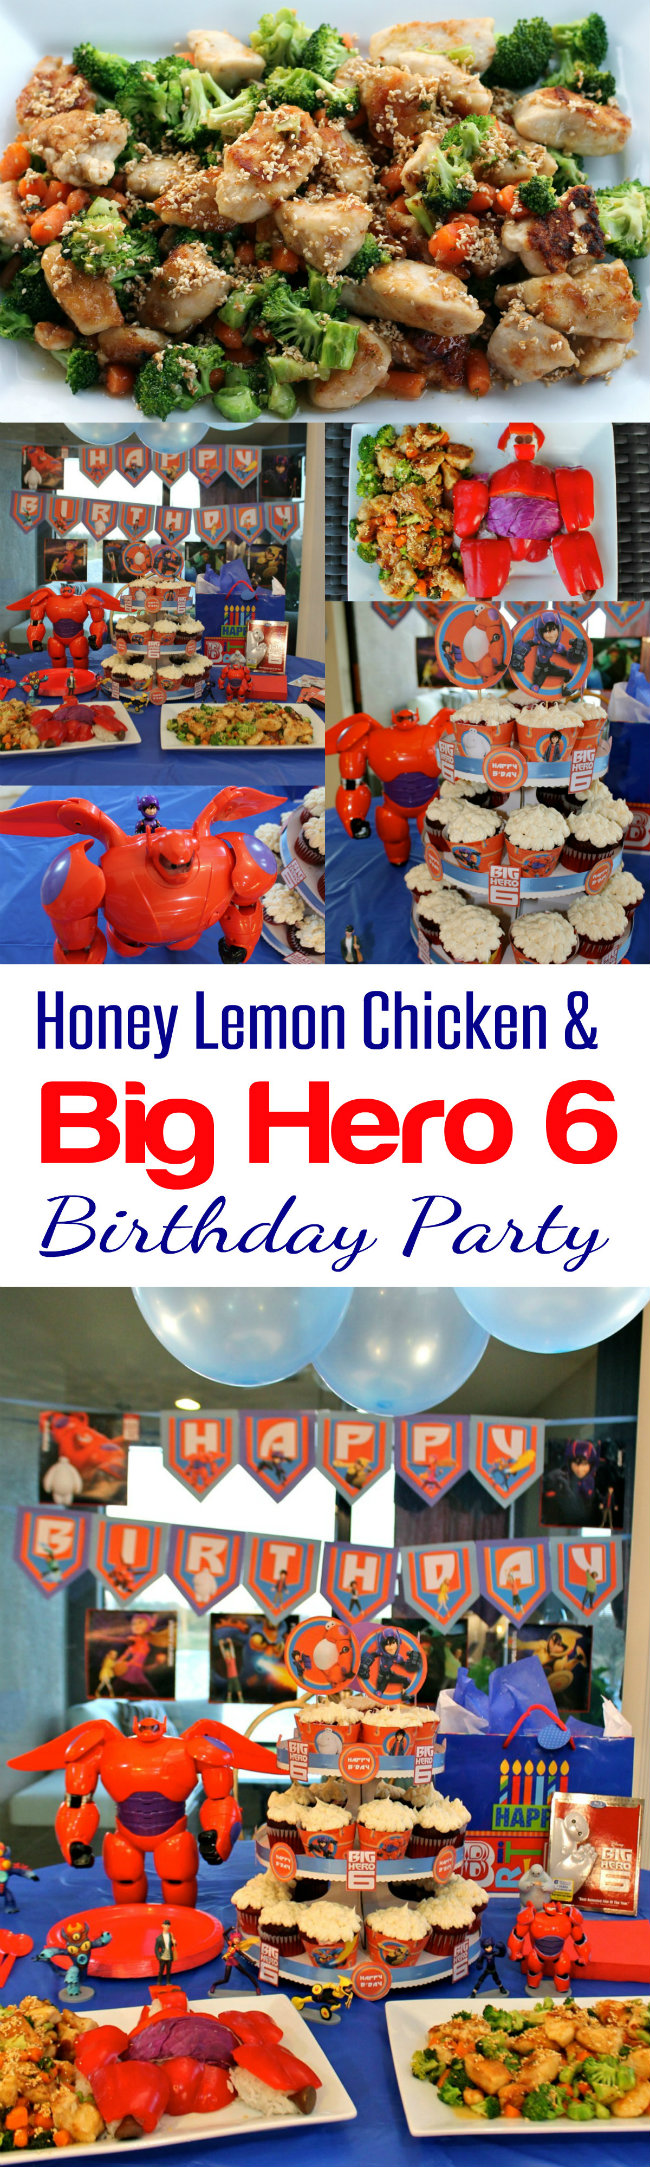 Delicious and Easy Recipe! Honey Lemon Chicken recipe and a Big Hero 6 Birthday Party from HappyandBlessedHome